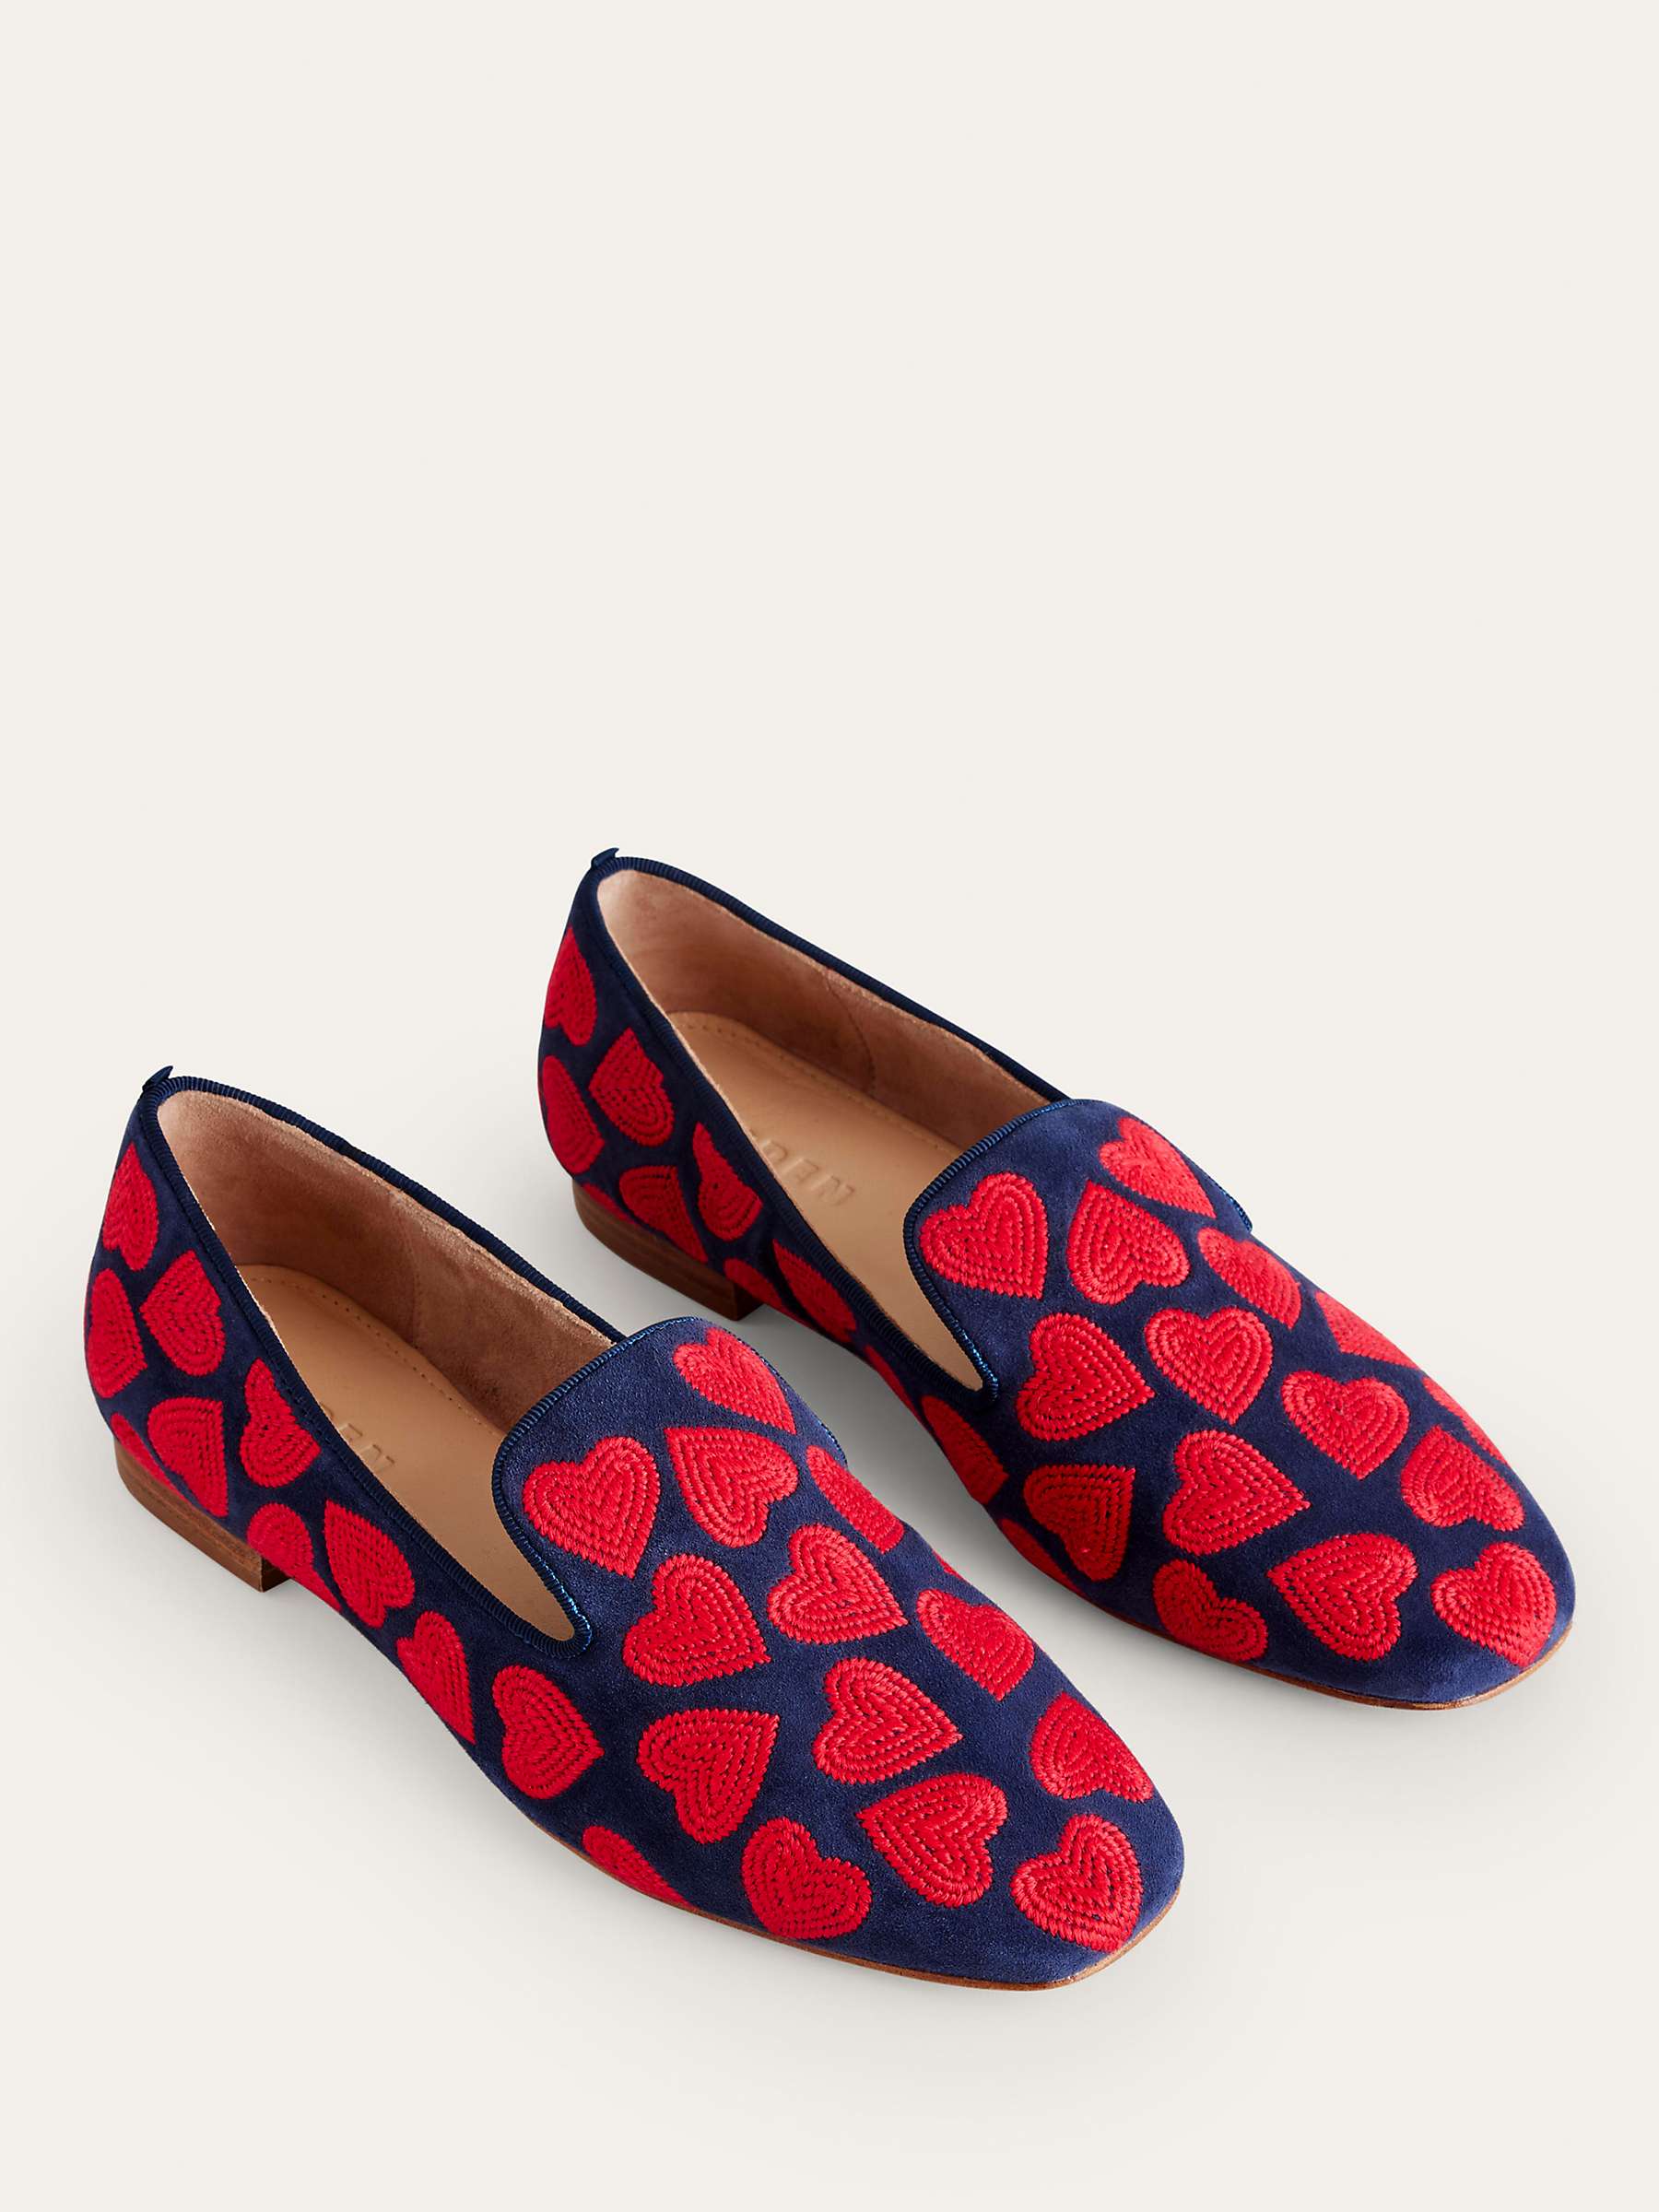 Buy Boden Heart Embroidered Slipper Cut Loafers, Navy/Red Online at johnlewis.com